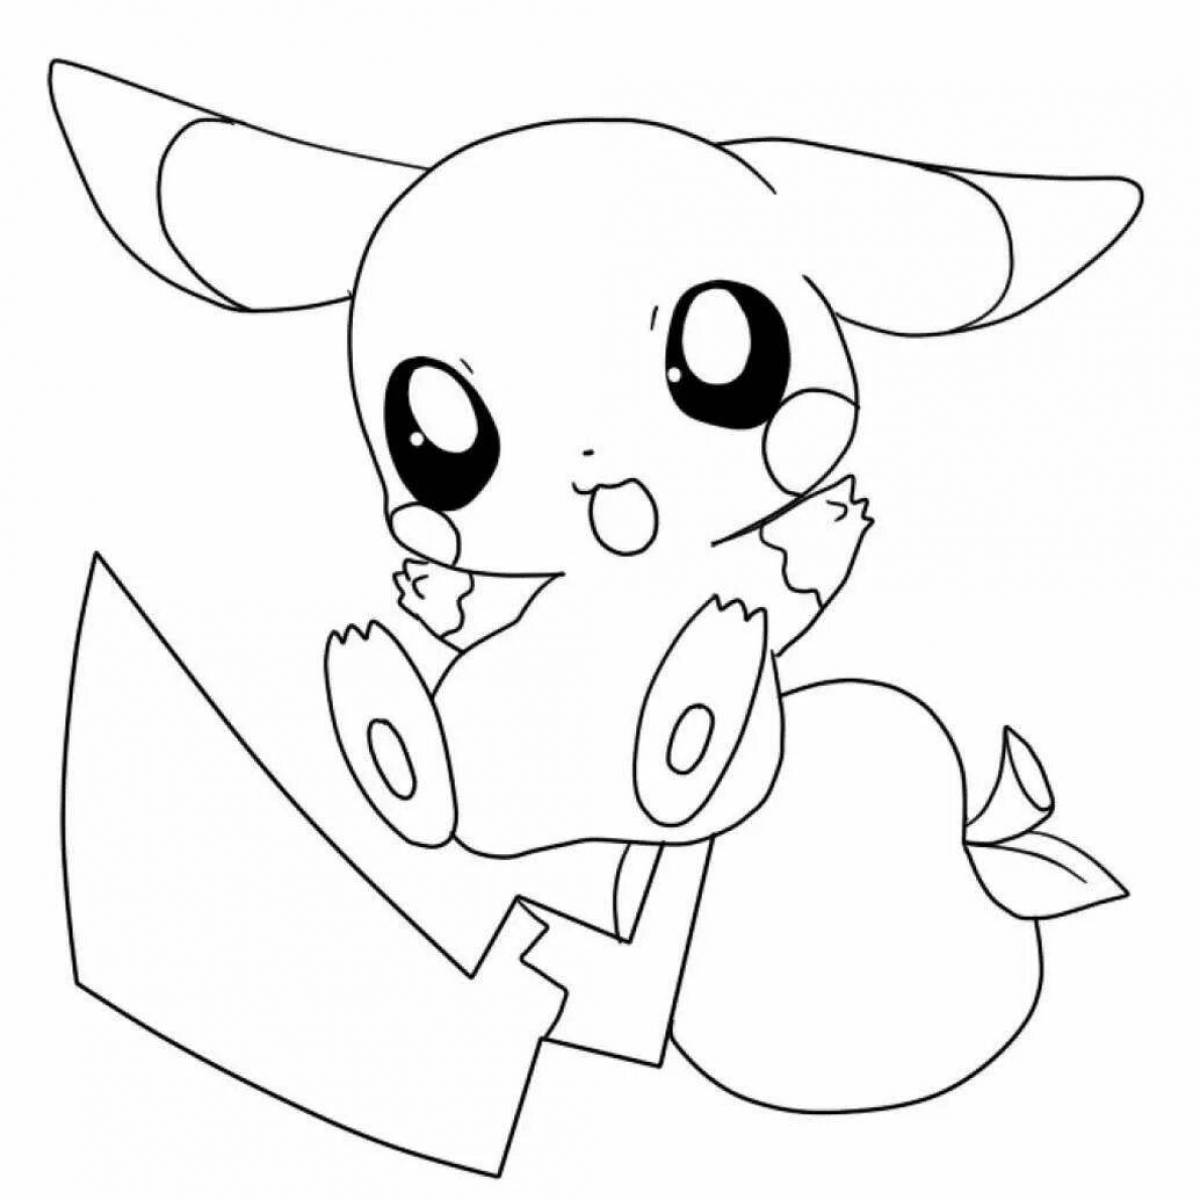 Playful pikachu seal coloring page